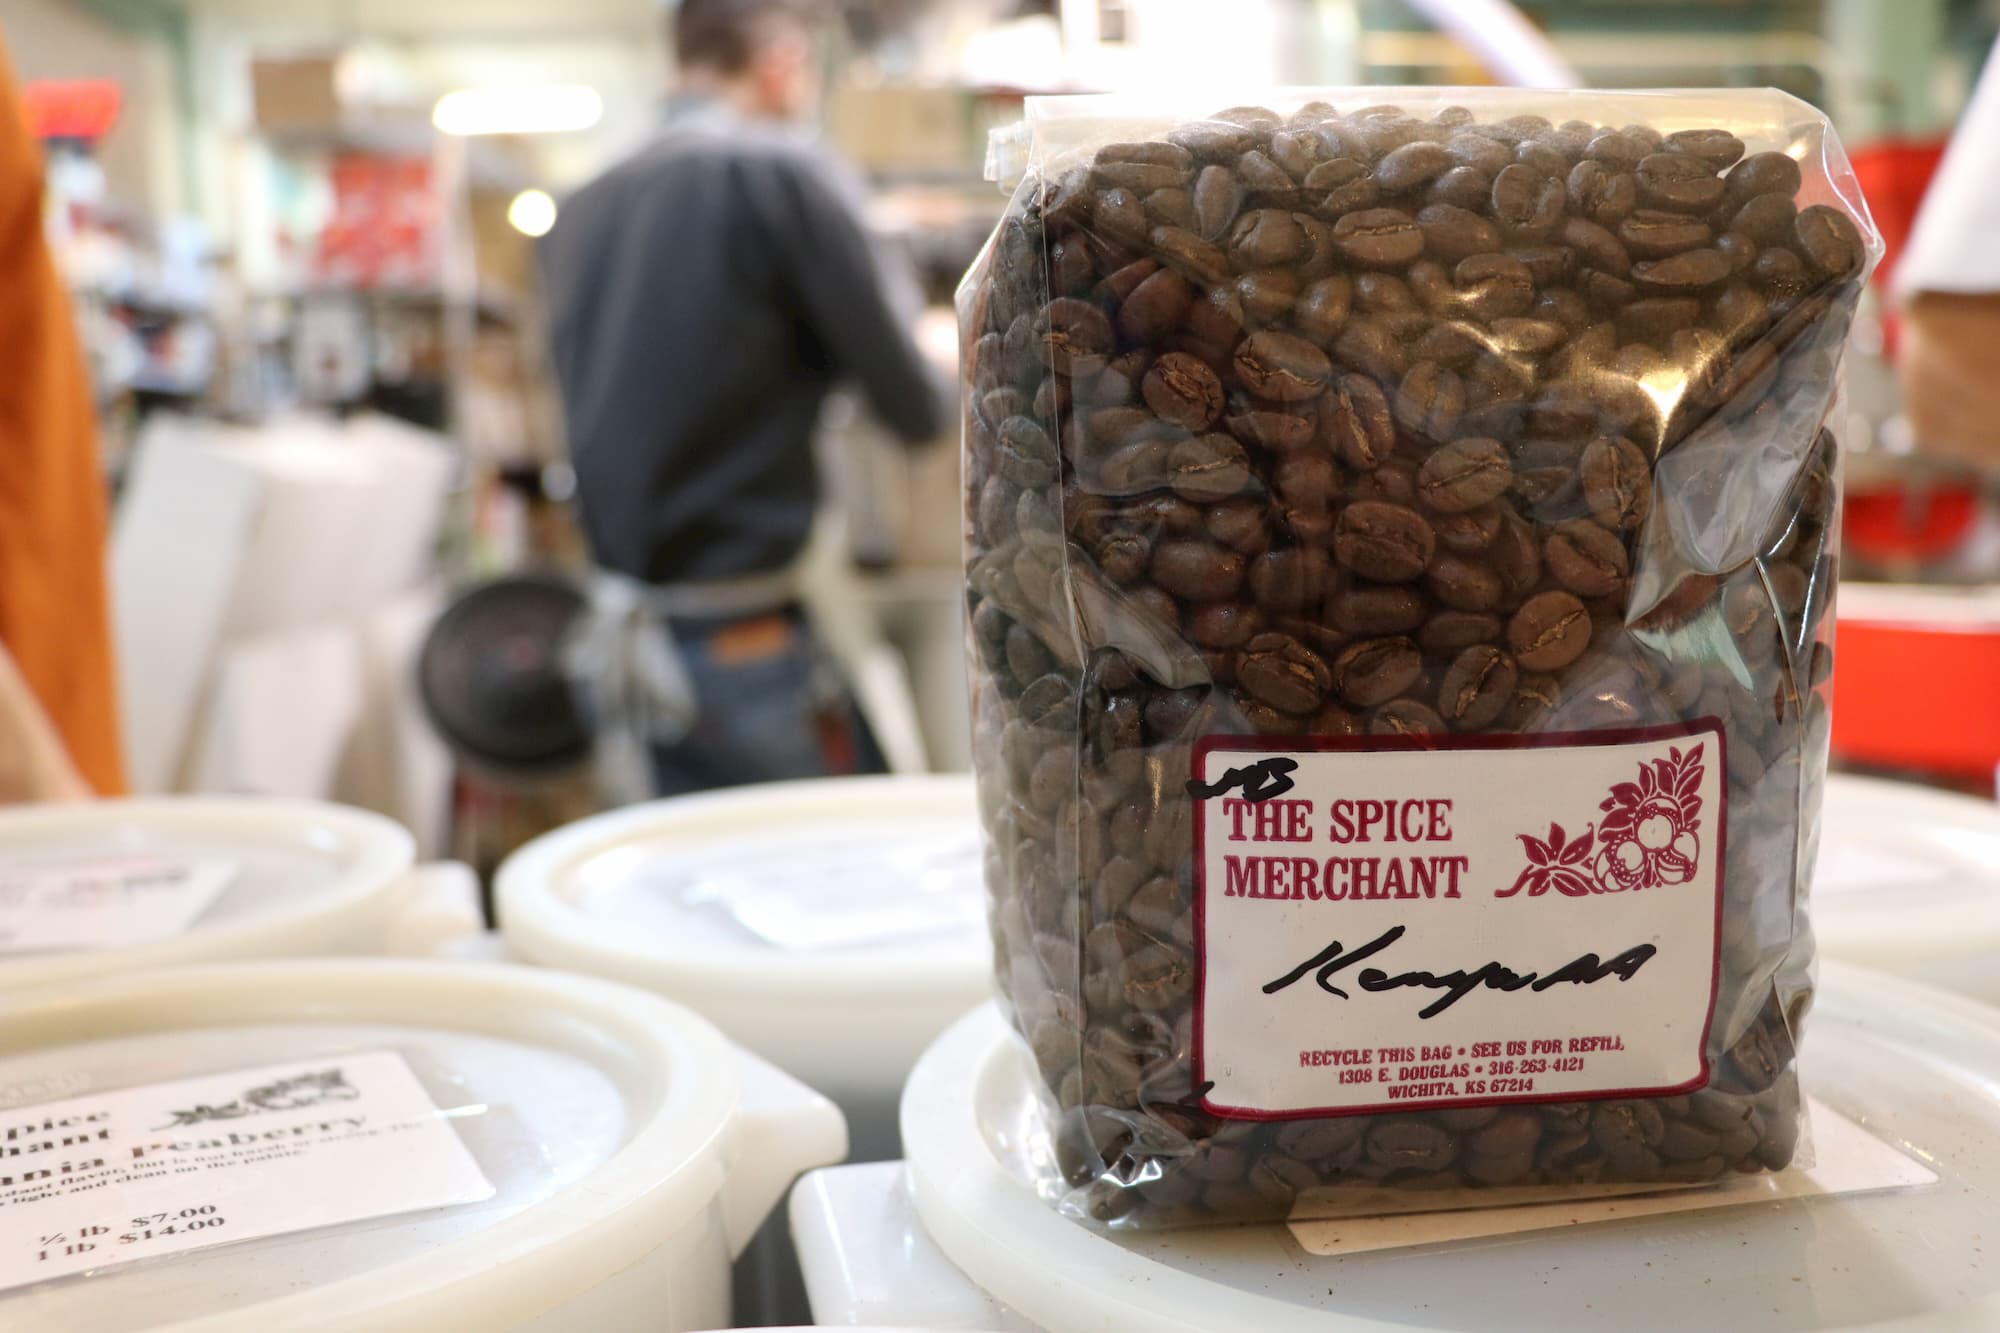 A bag of Spice Merchant coffee beans is in the foreground, while a worker rings someone up in the background